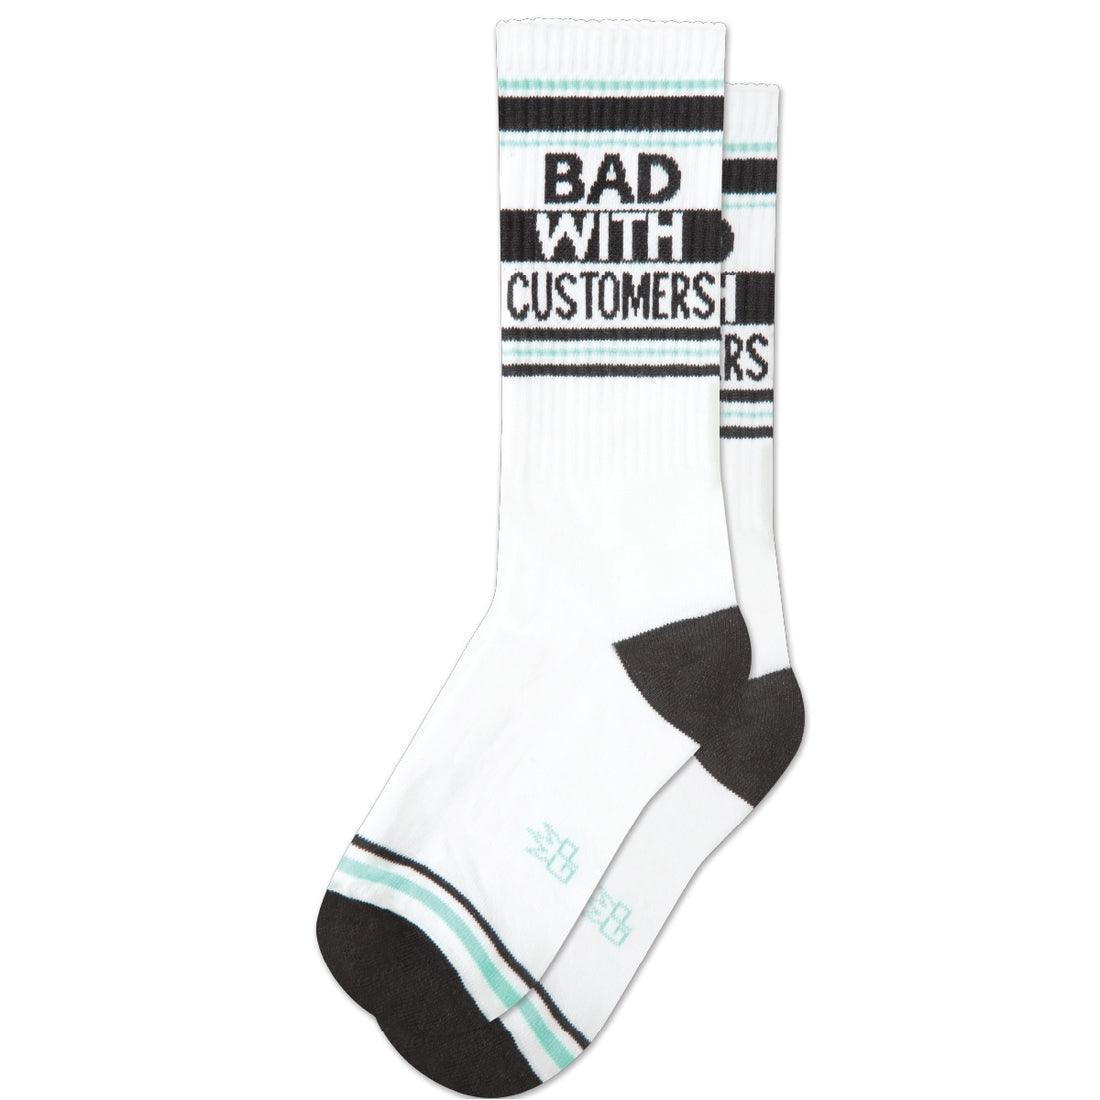 BAD WITH CUSTOMERS Gym Socks - Gumball Poodle - The Sock Monster